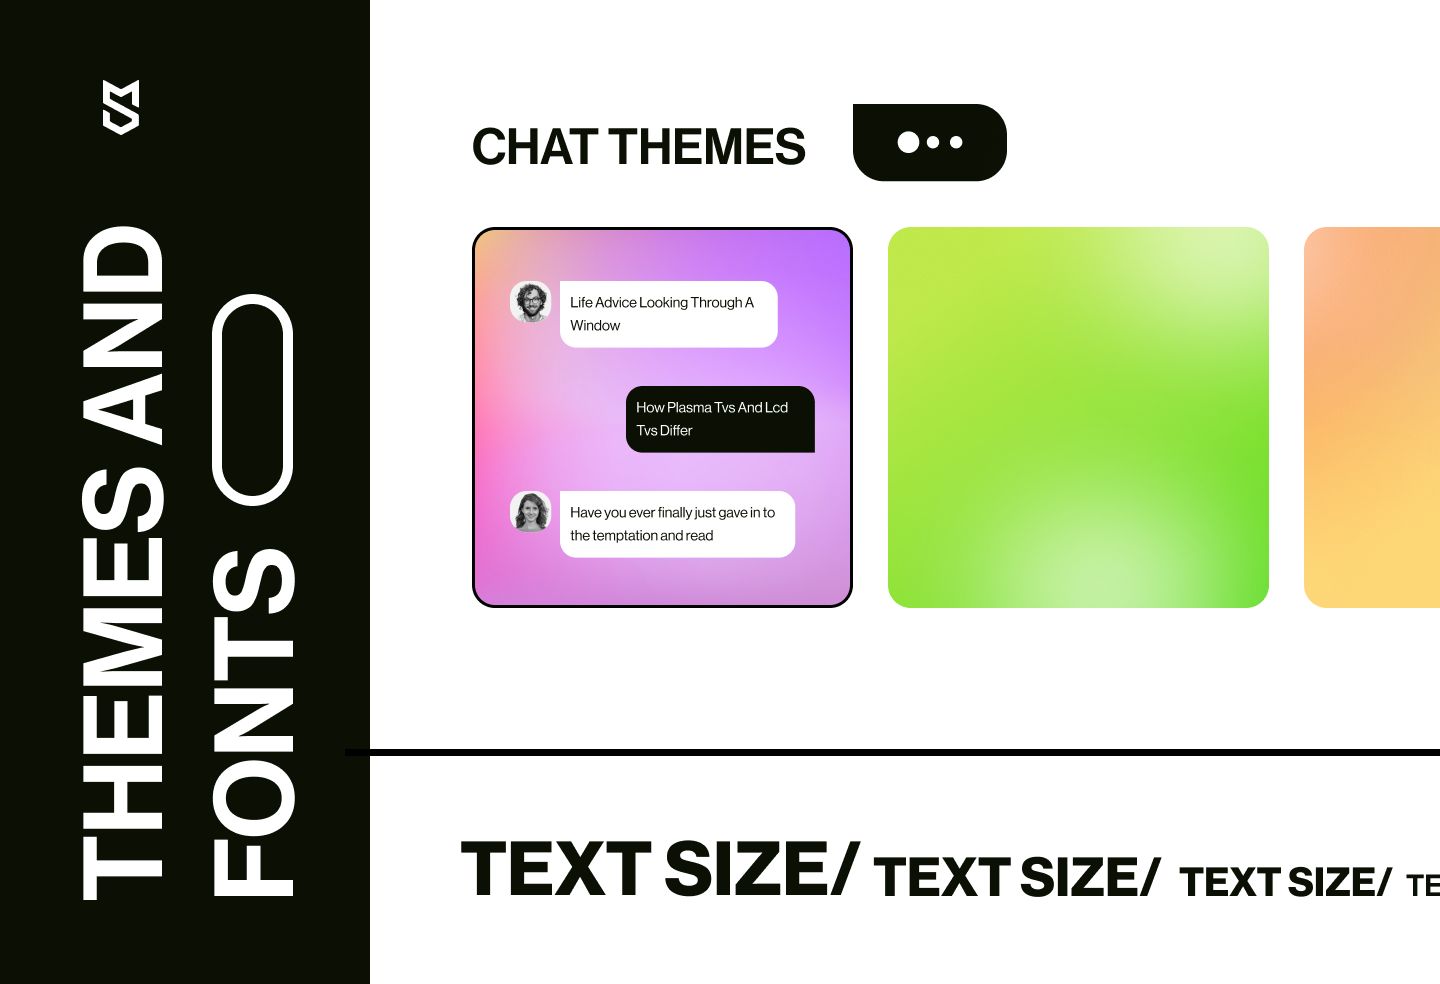 Examples of appropriate themes for a secure messaging app